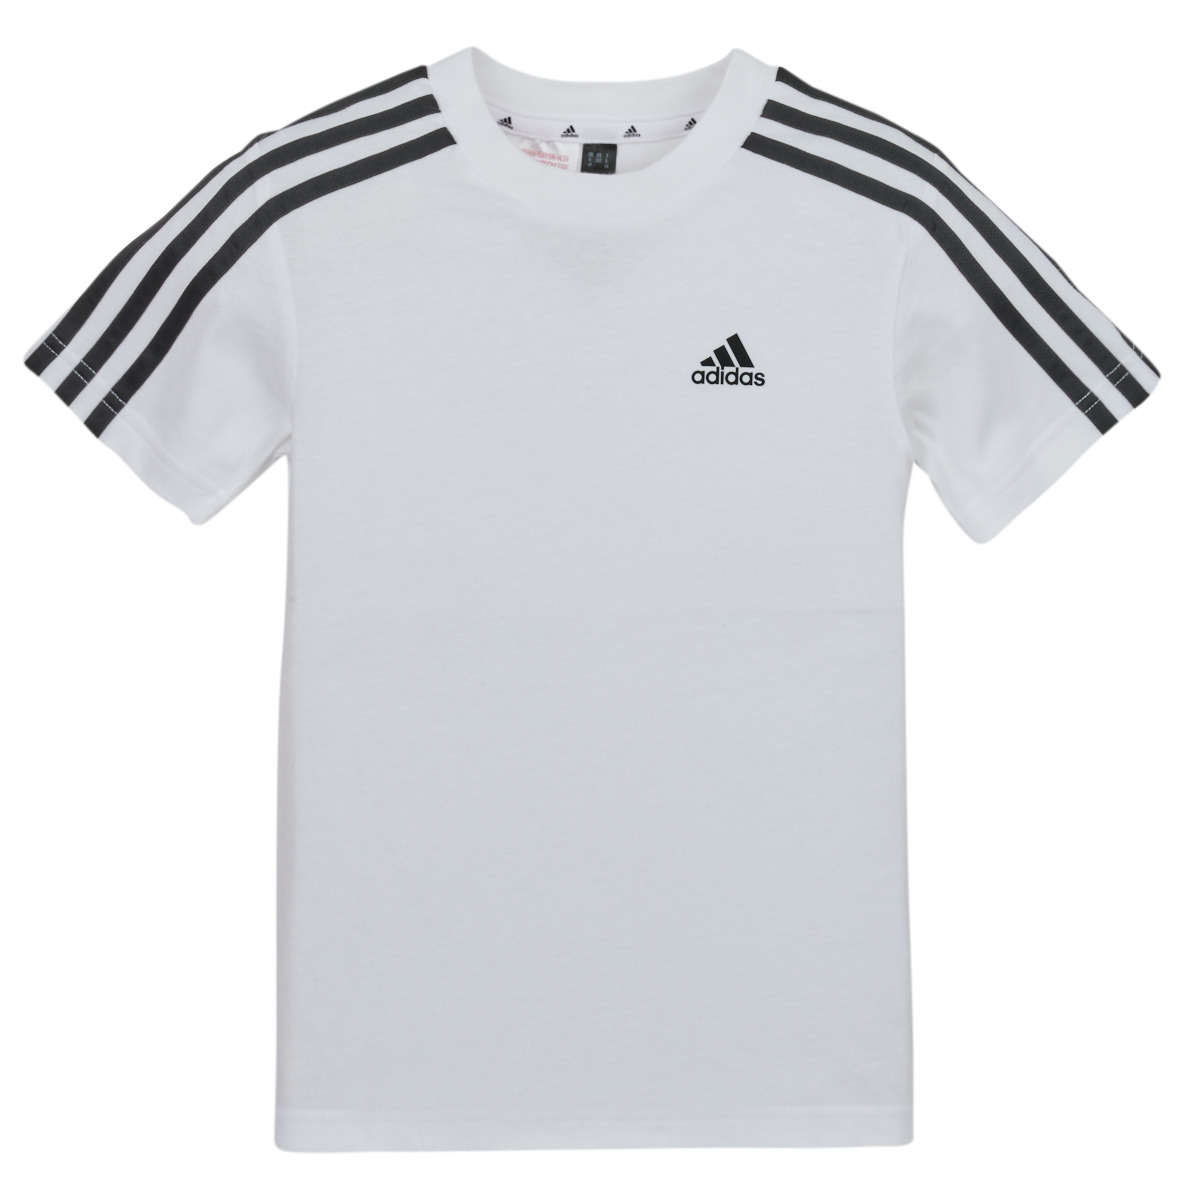 Adidas Sportswear LK 3S Delivery Short-sleeved Child White Free CO Rubbersole.co.uk - ! t-shirts TEE £ with - Clothing